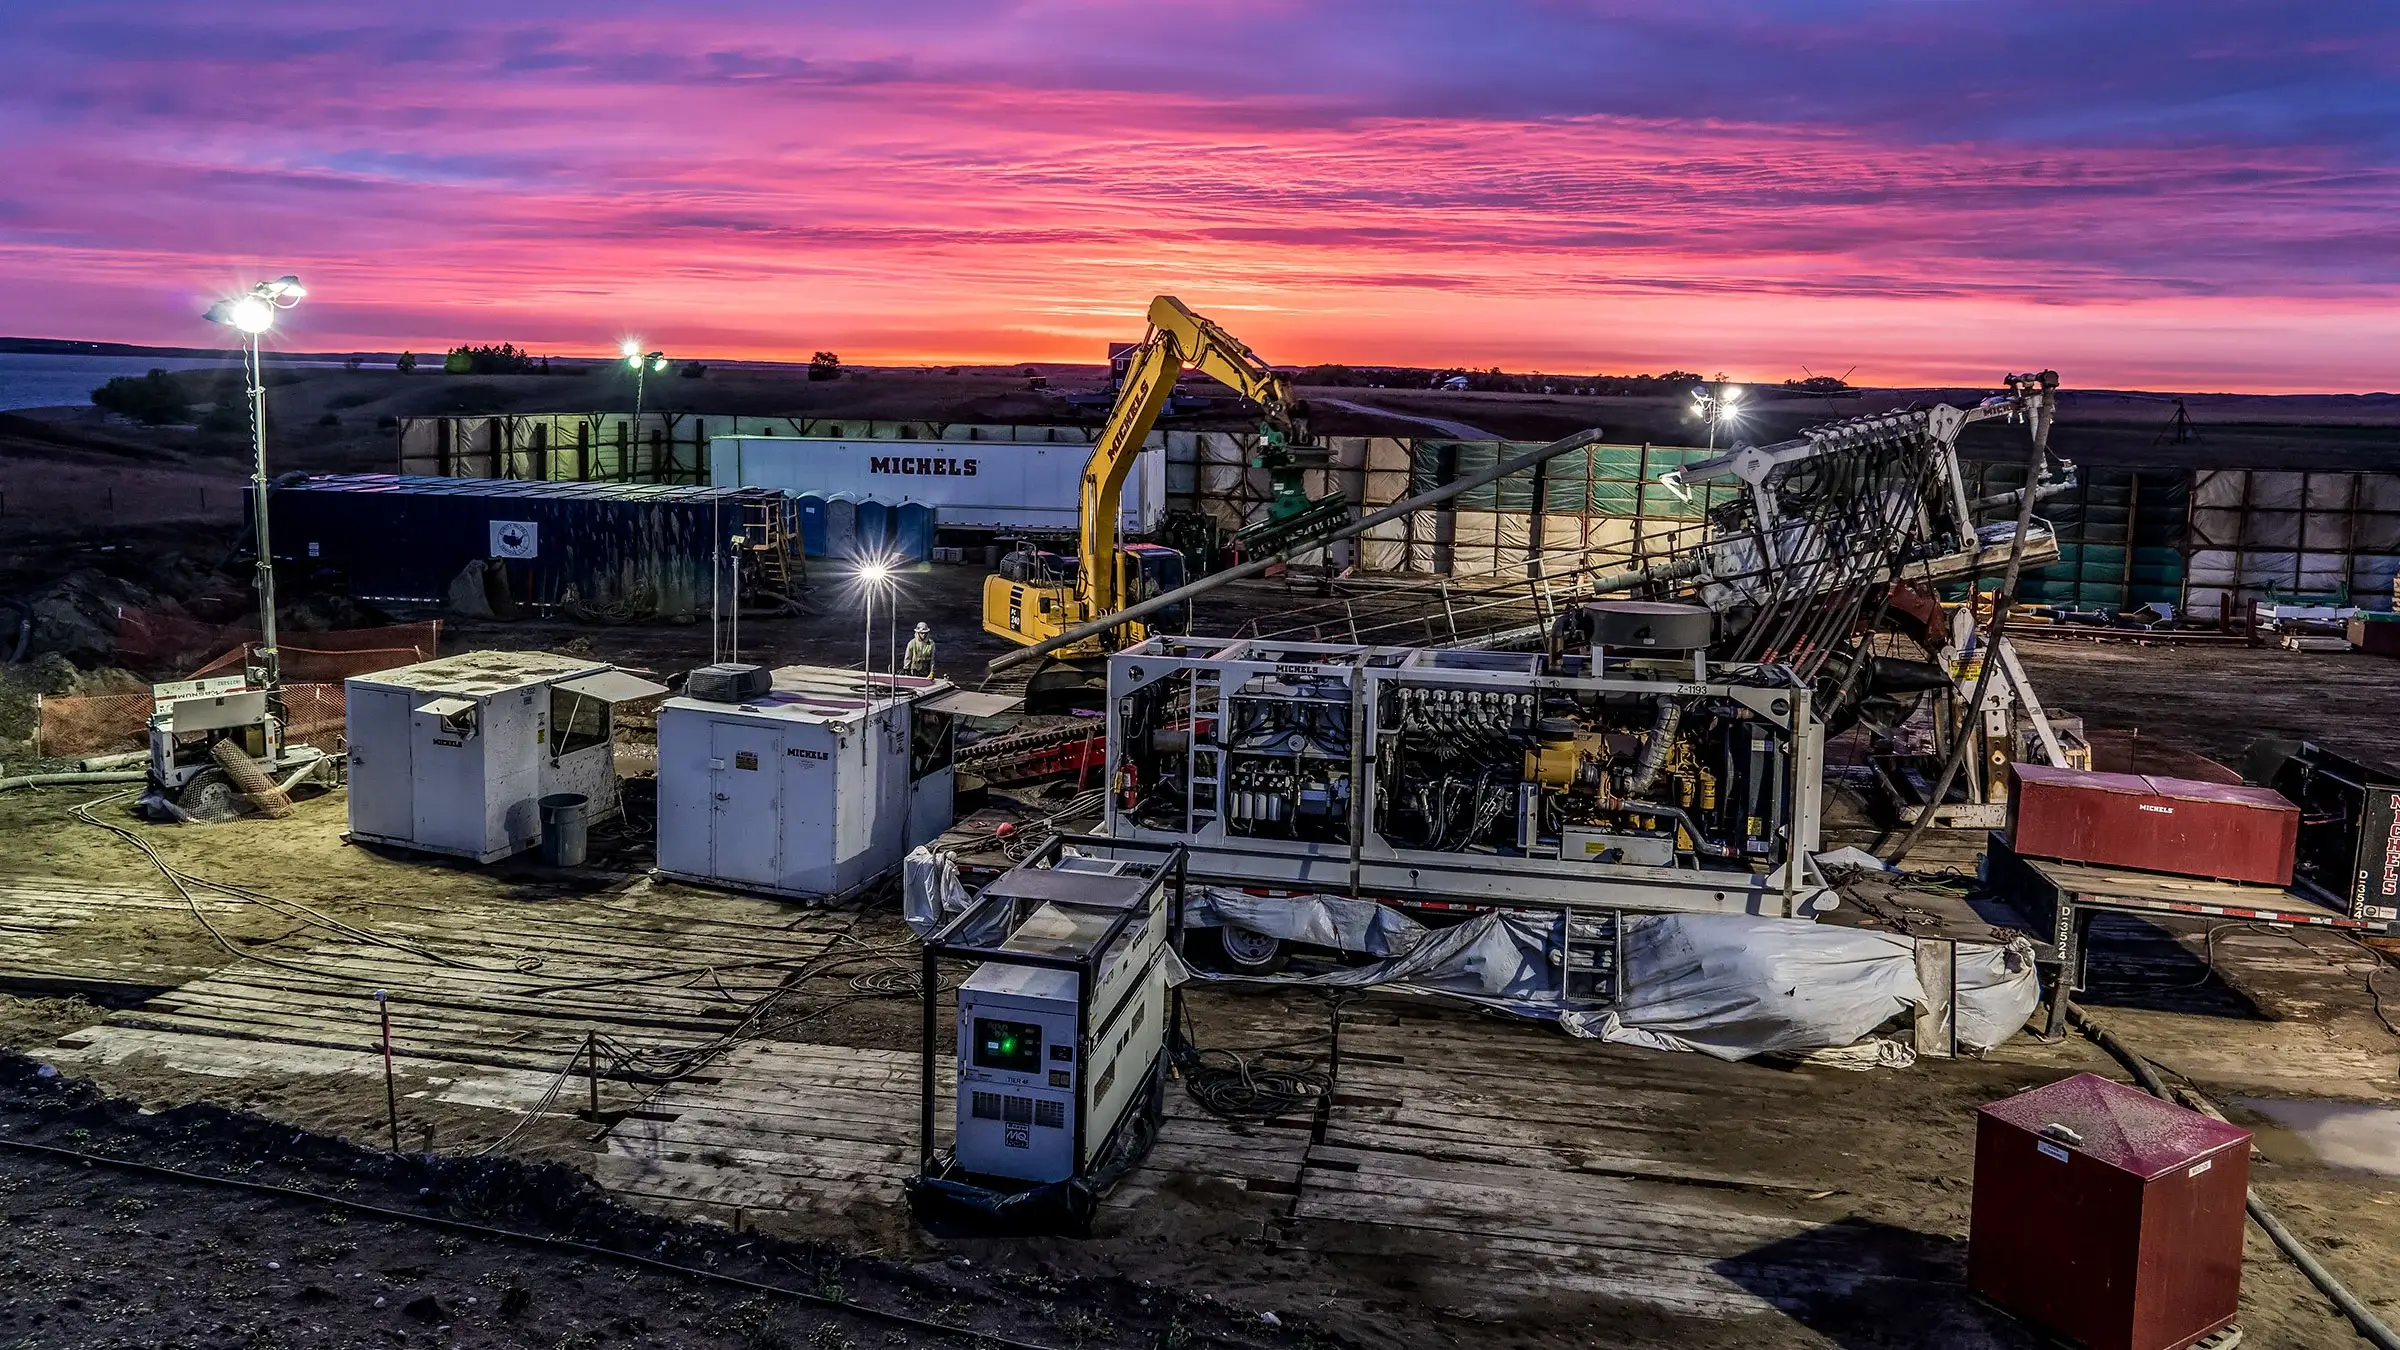 An HDD rig drills into the ground during a magnificent sunset.